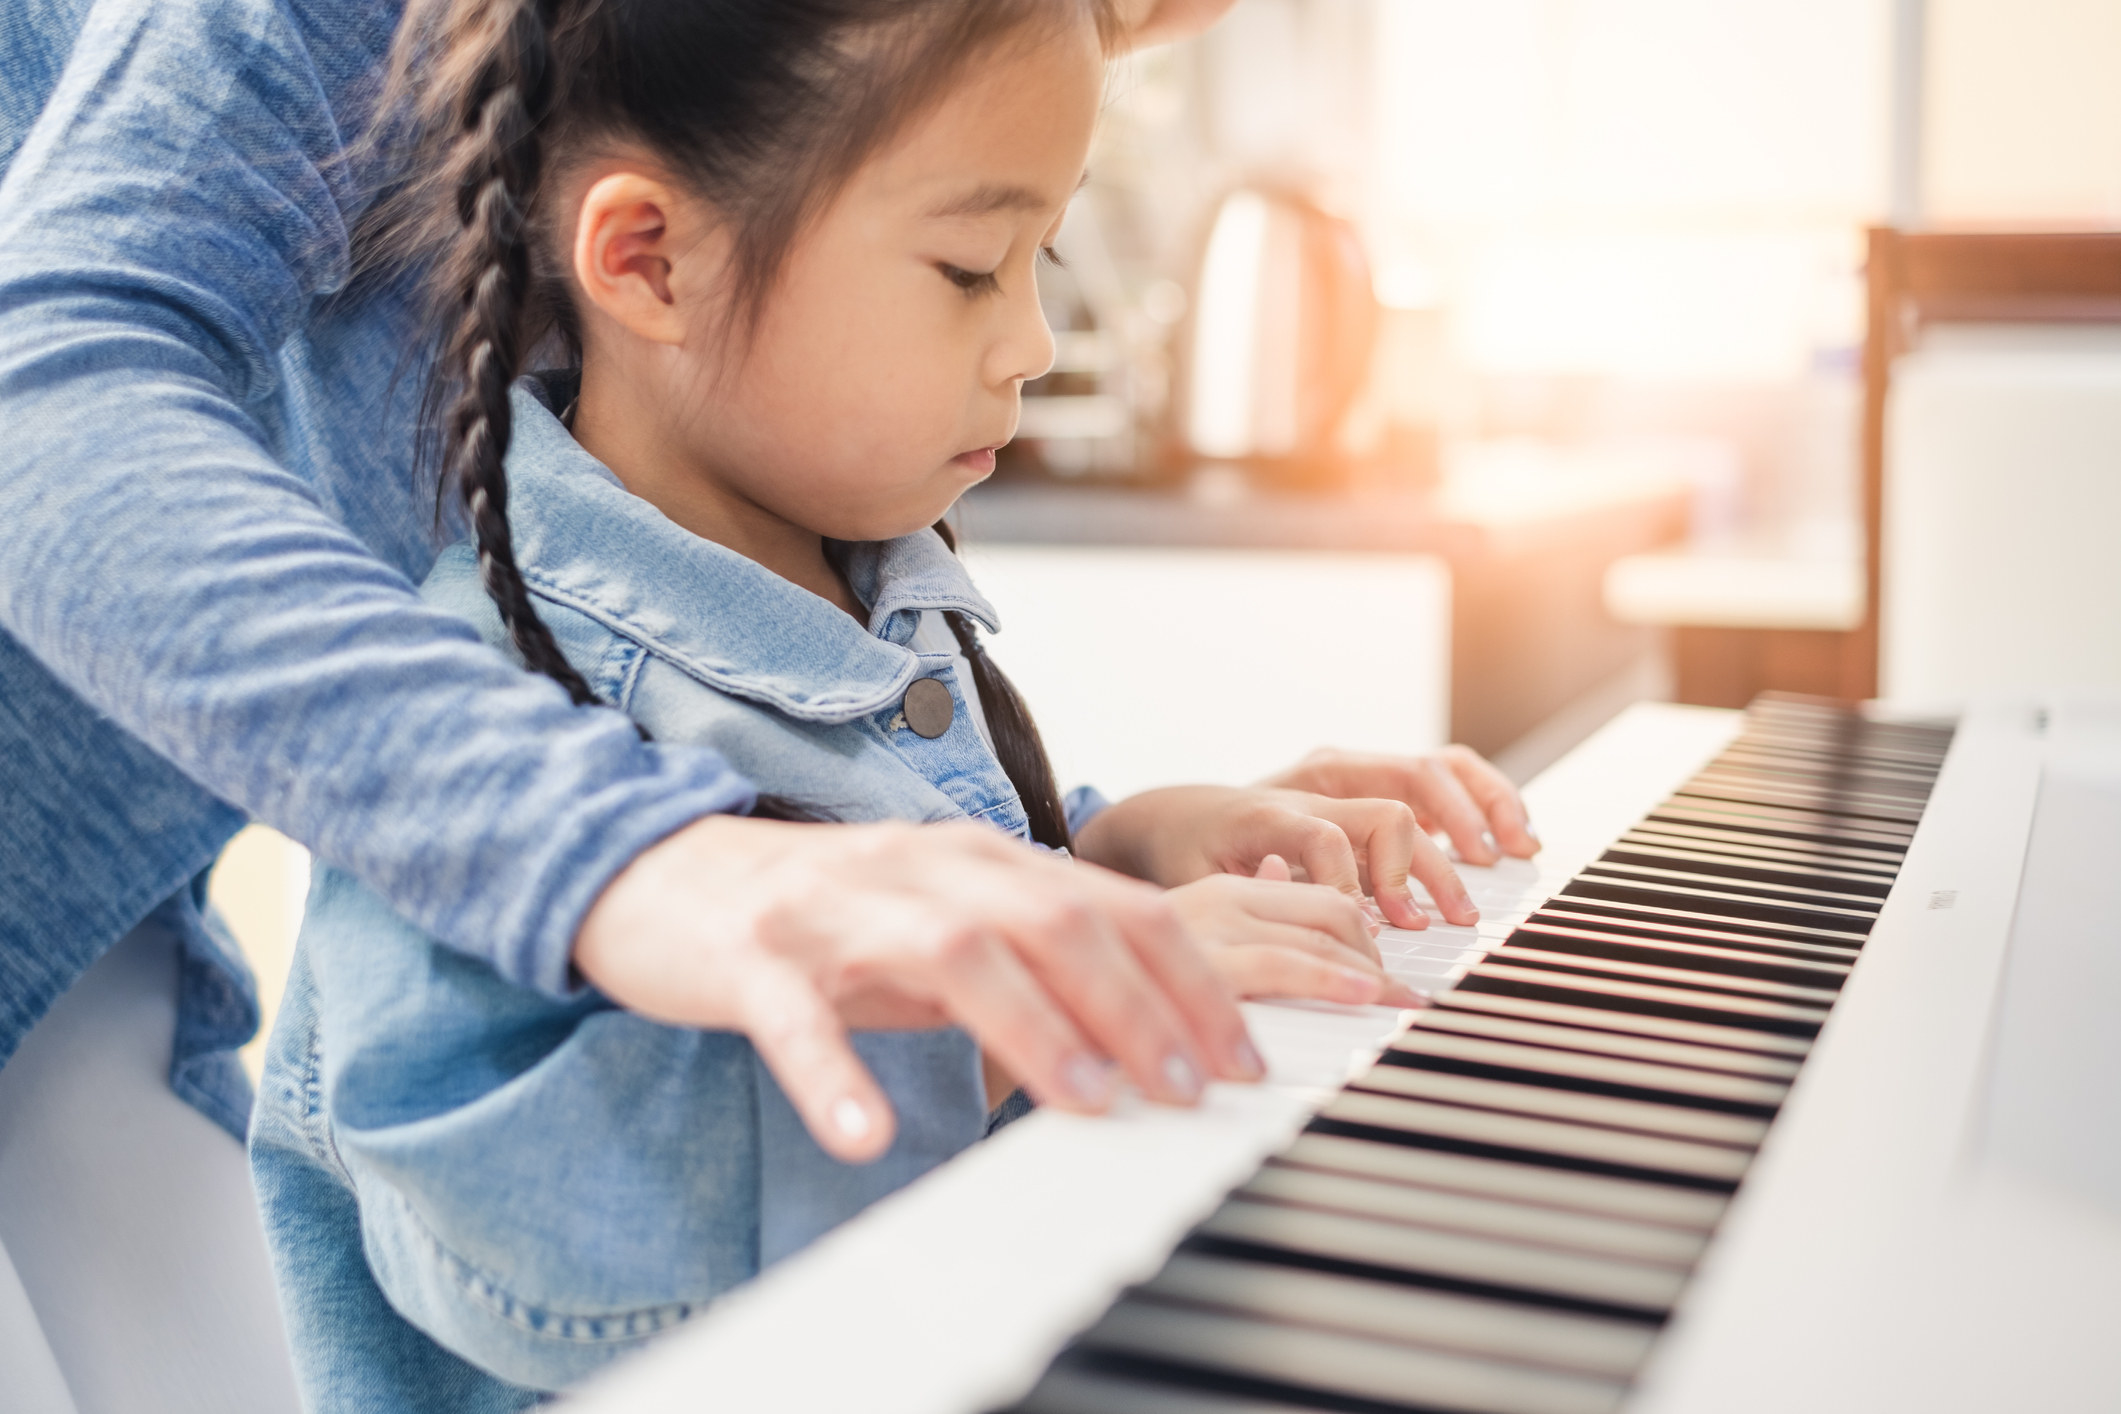 Child playing piano as adult stands over her also playing